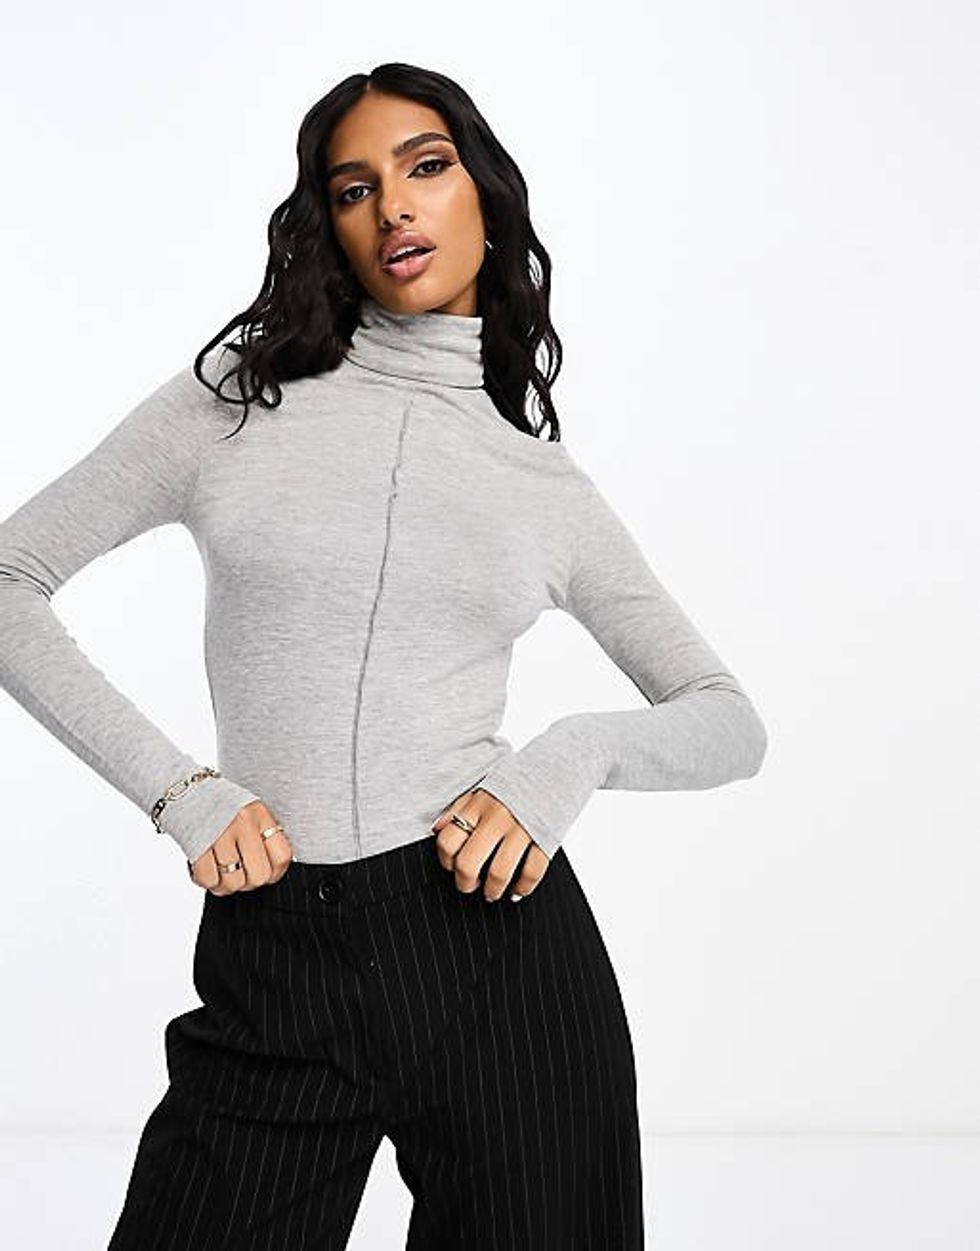 Super Cozy Turtlenecks For Cold Weather Outfits - Brit + Co